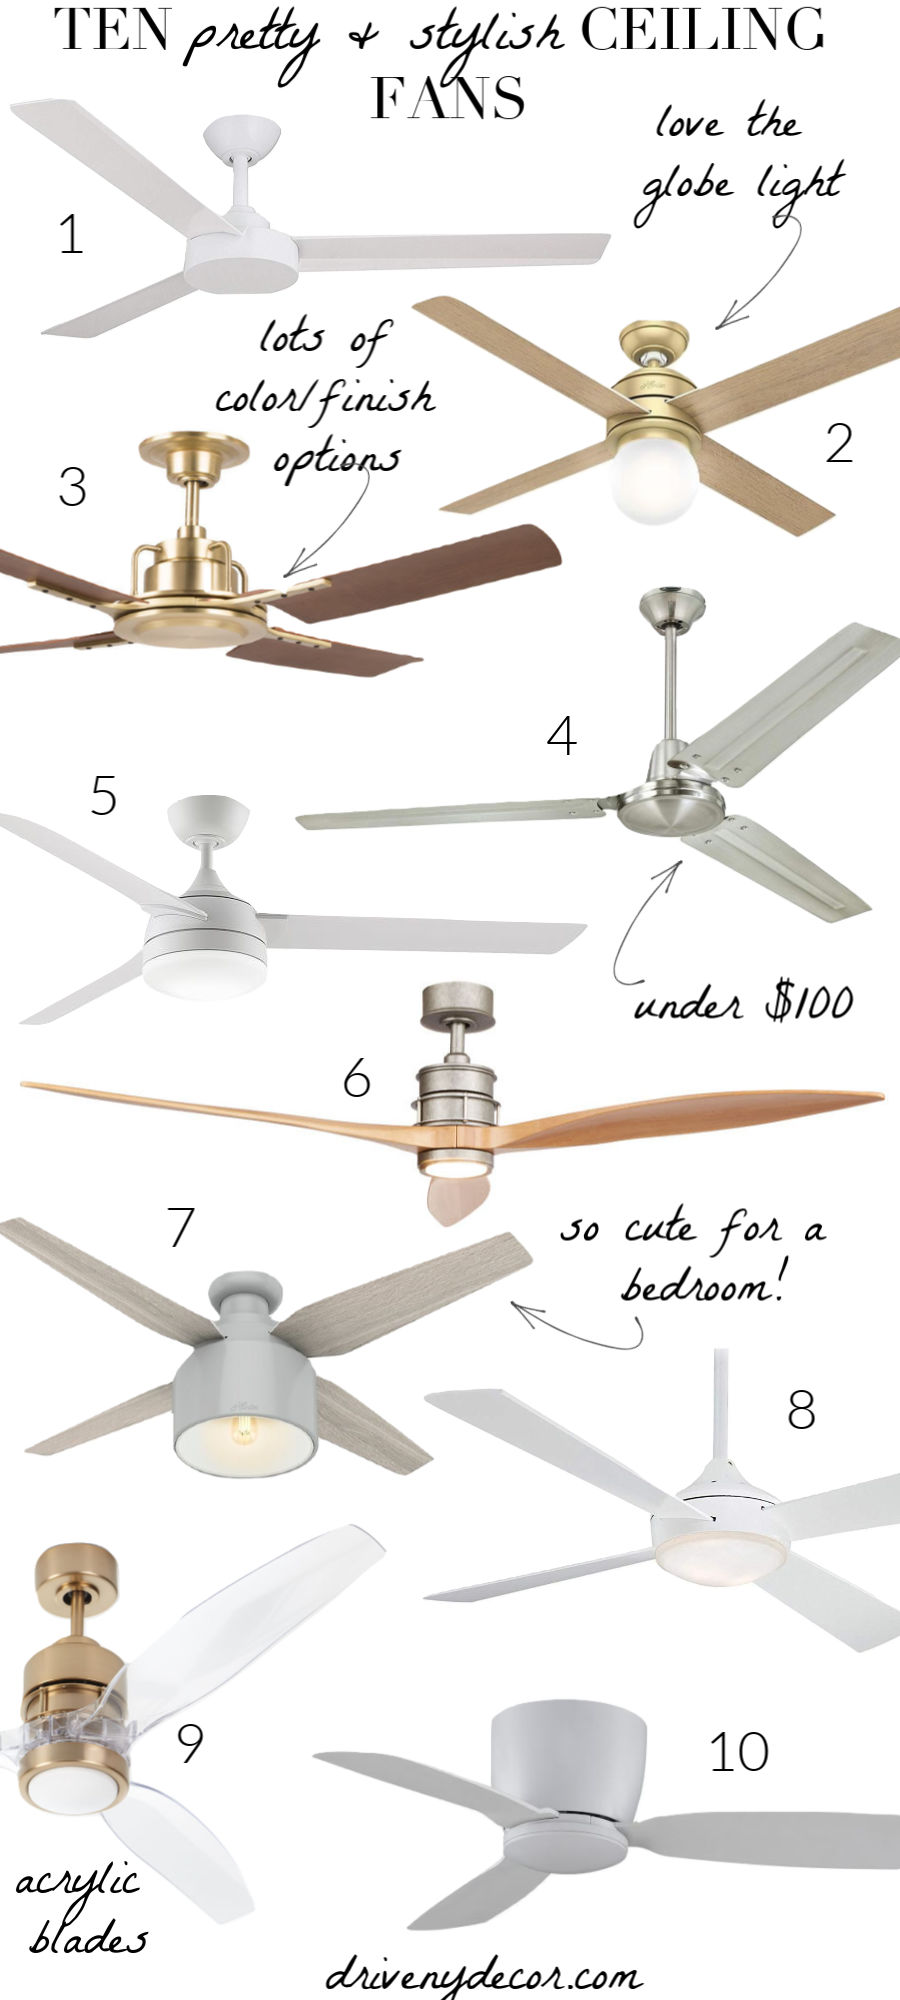 Ten Pretty Stylish Ceiling Fans It S Time To Kick Your Dated